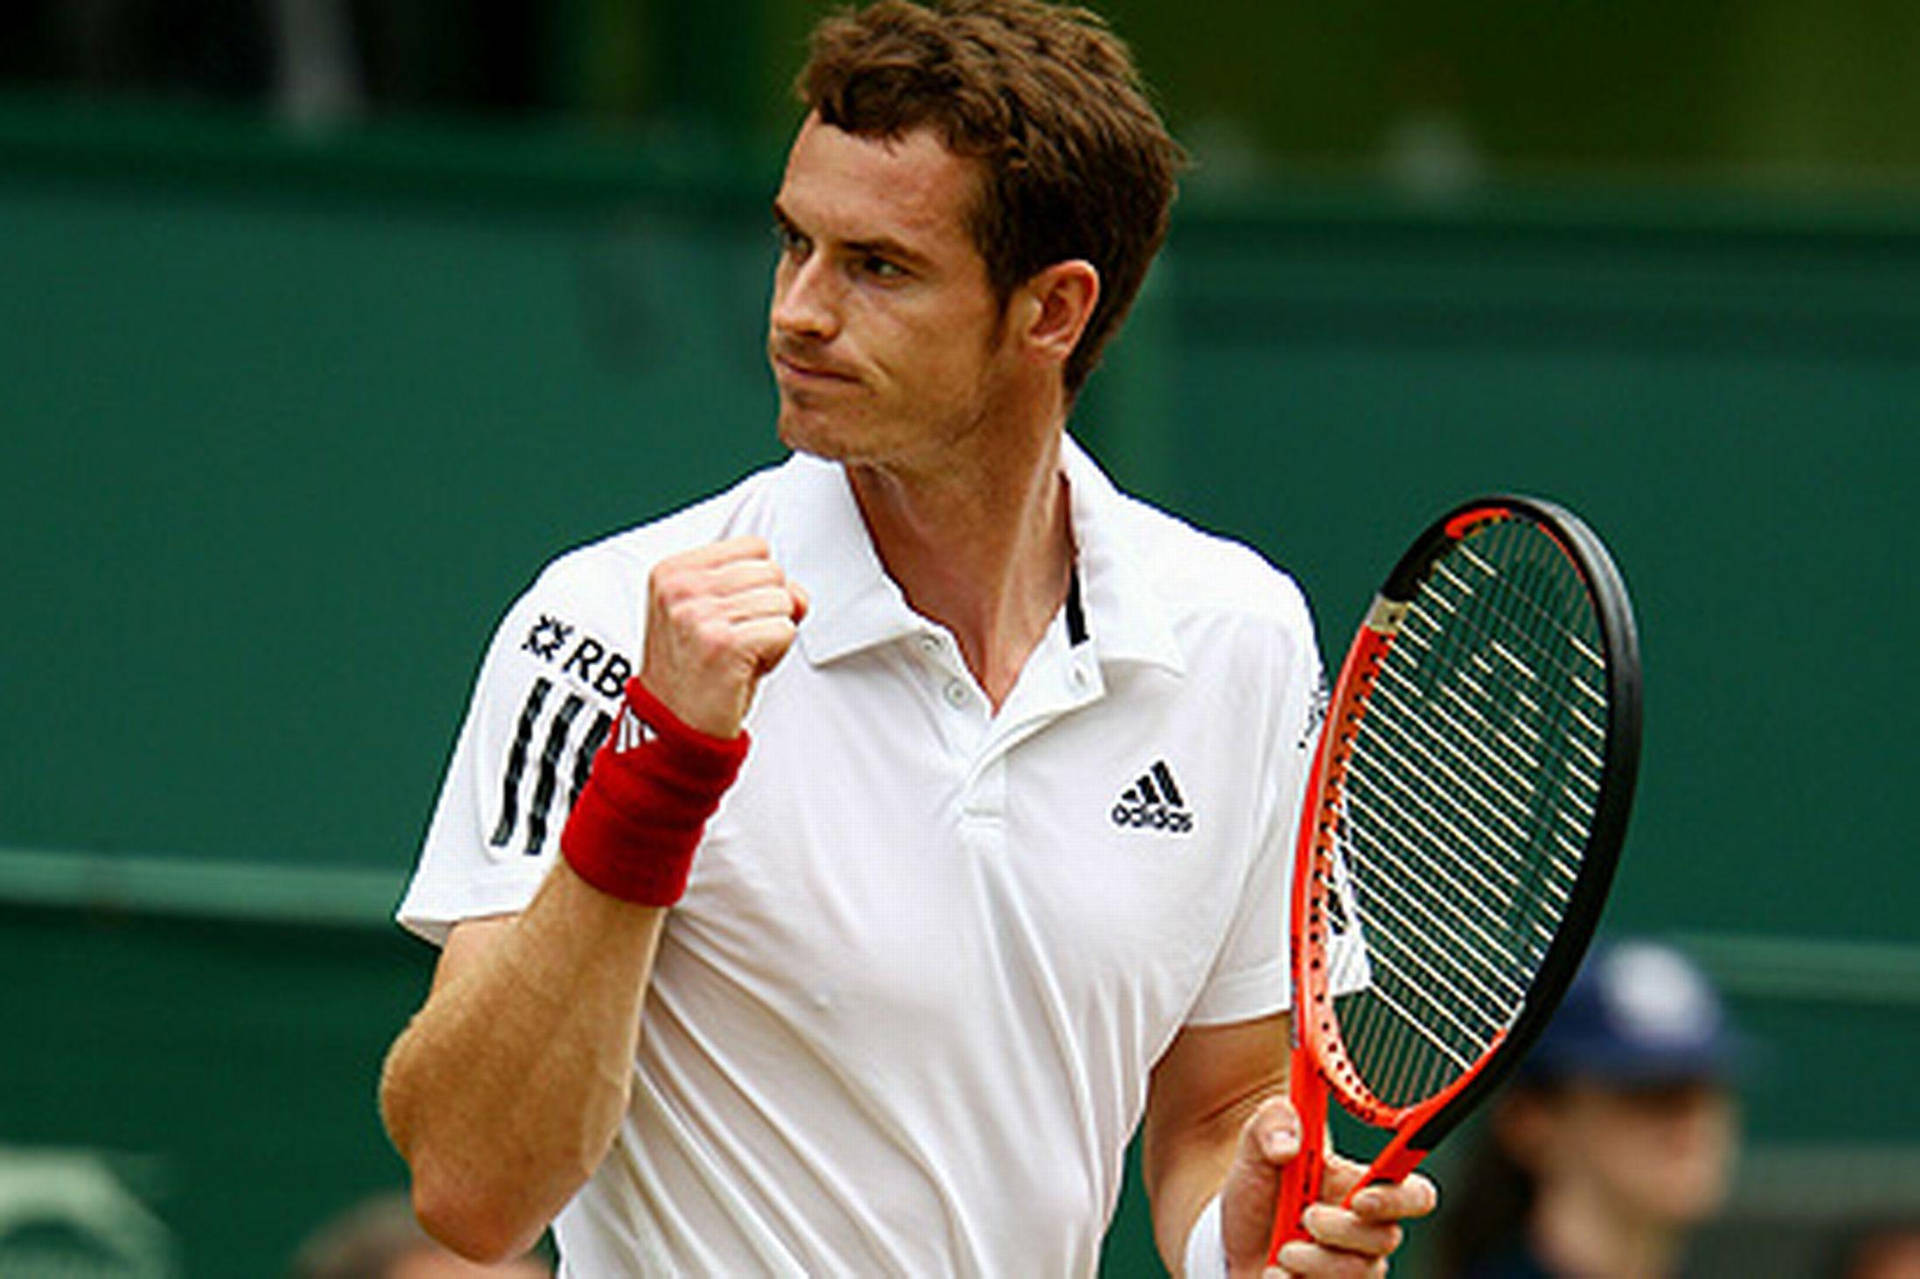 Tennis Prodigy Andy Murray In A Fierce Shot